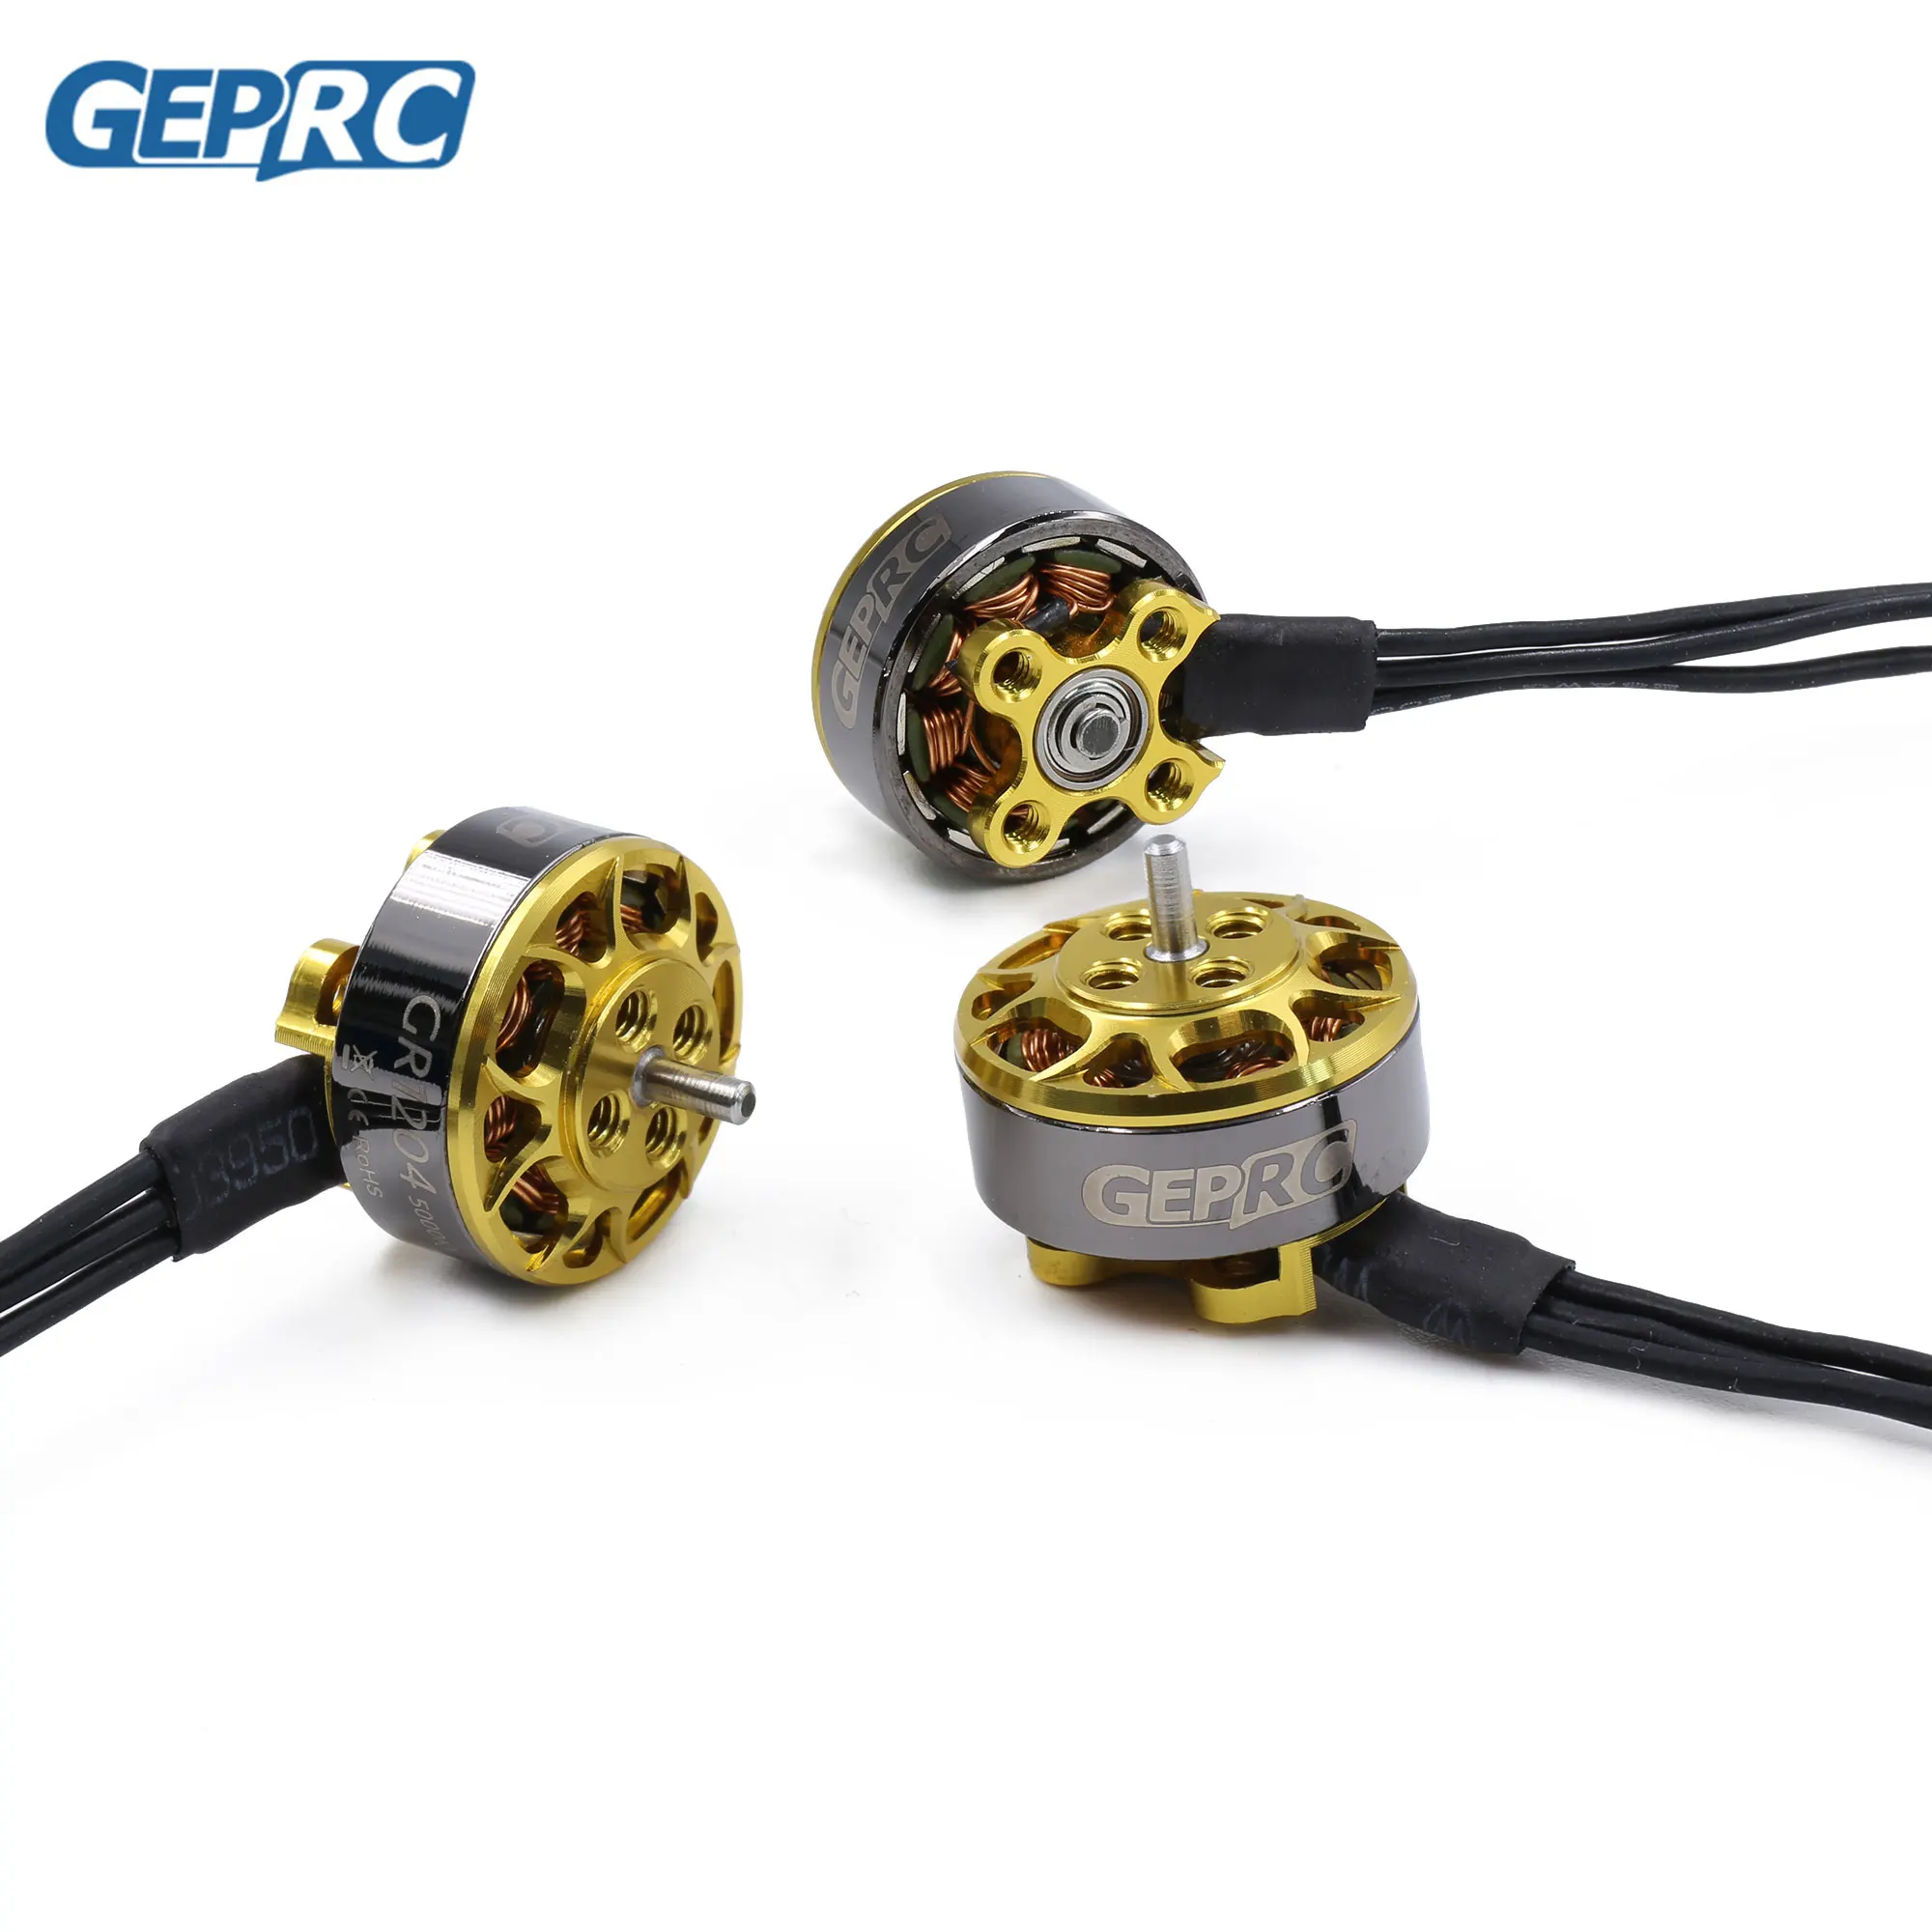 GEPRC GR1204 1204 5000KV 3750KV 2-4S Brushless Motor for RC FPV Racing Freestyle Toothpick Cinewhoop Ducted Drones DIY Parts